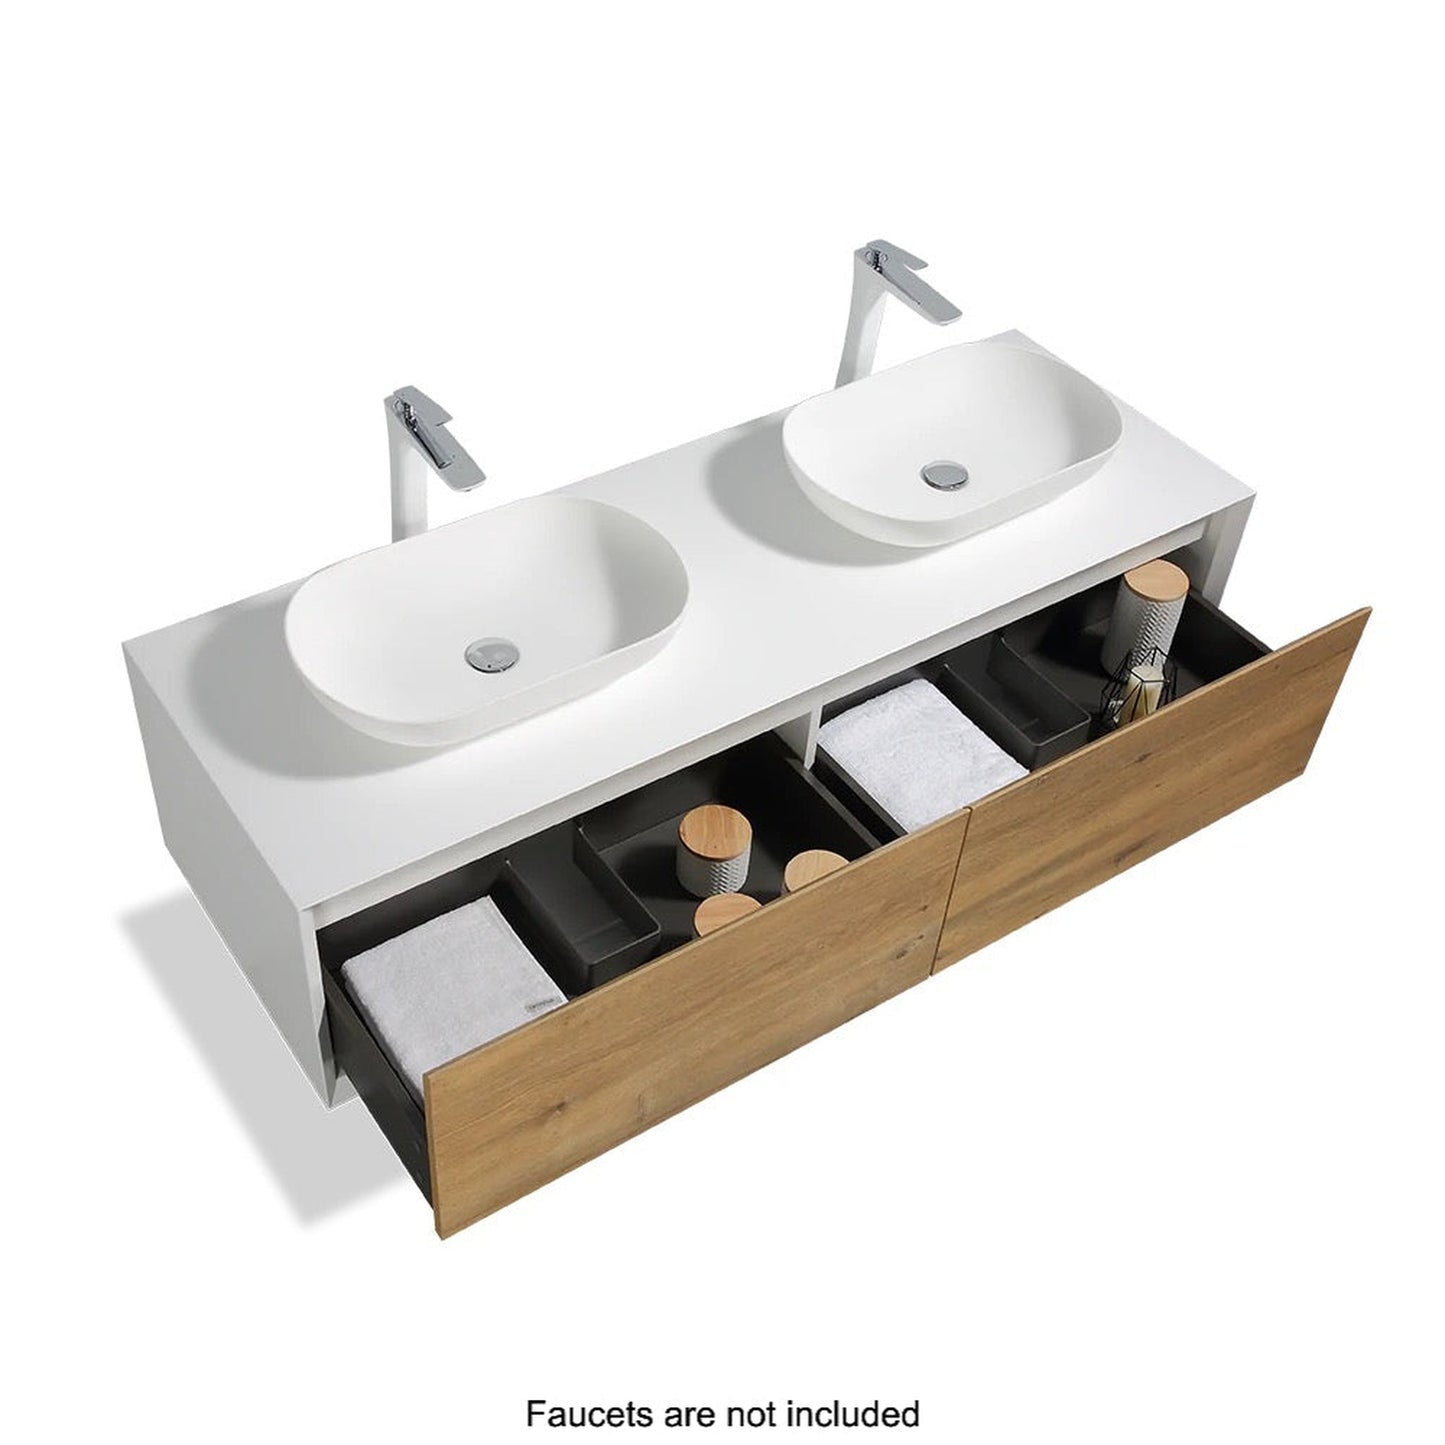 TONA Fiona 72" White Oak Grain & Matte White Wall-Mounted Bathroom Vanity Set With Lacquered MDF Countertop and Single Vessel Sink